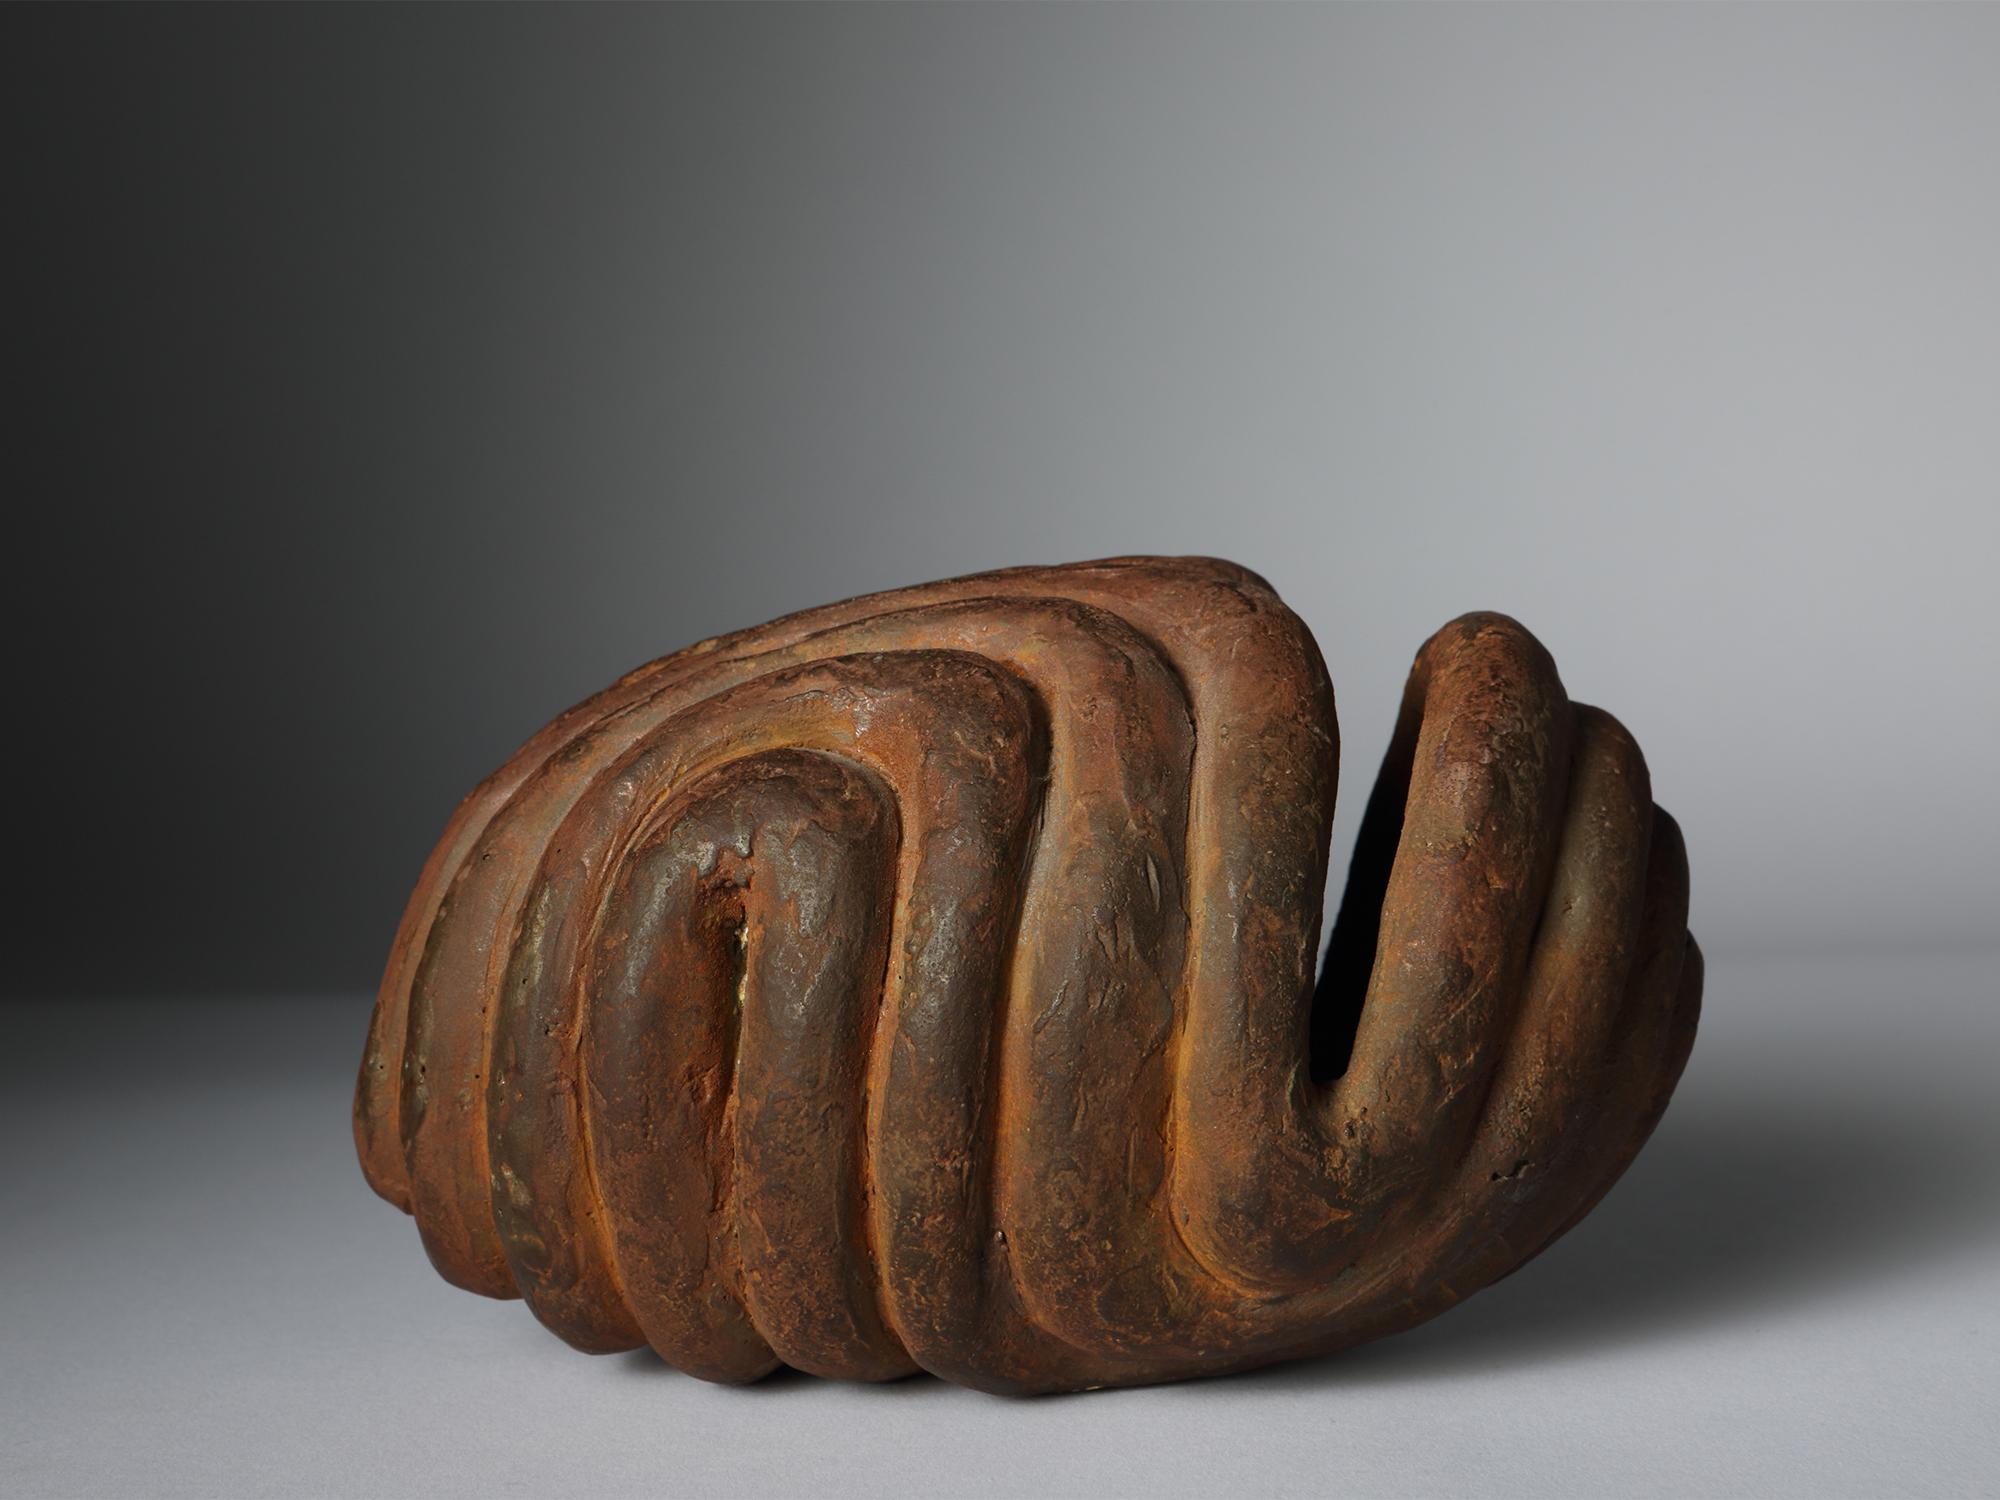 Peter Randall-Page Abstract Sculpture - Iron Husk II